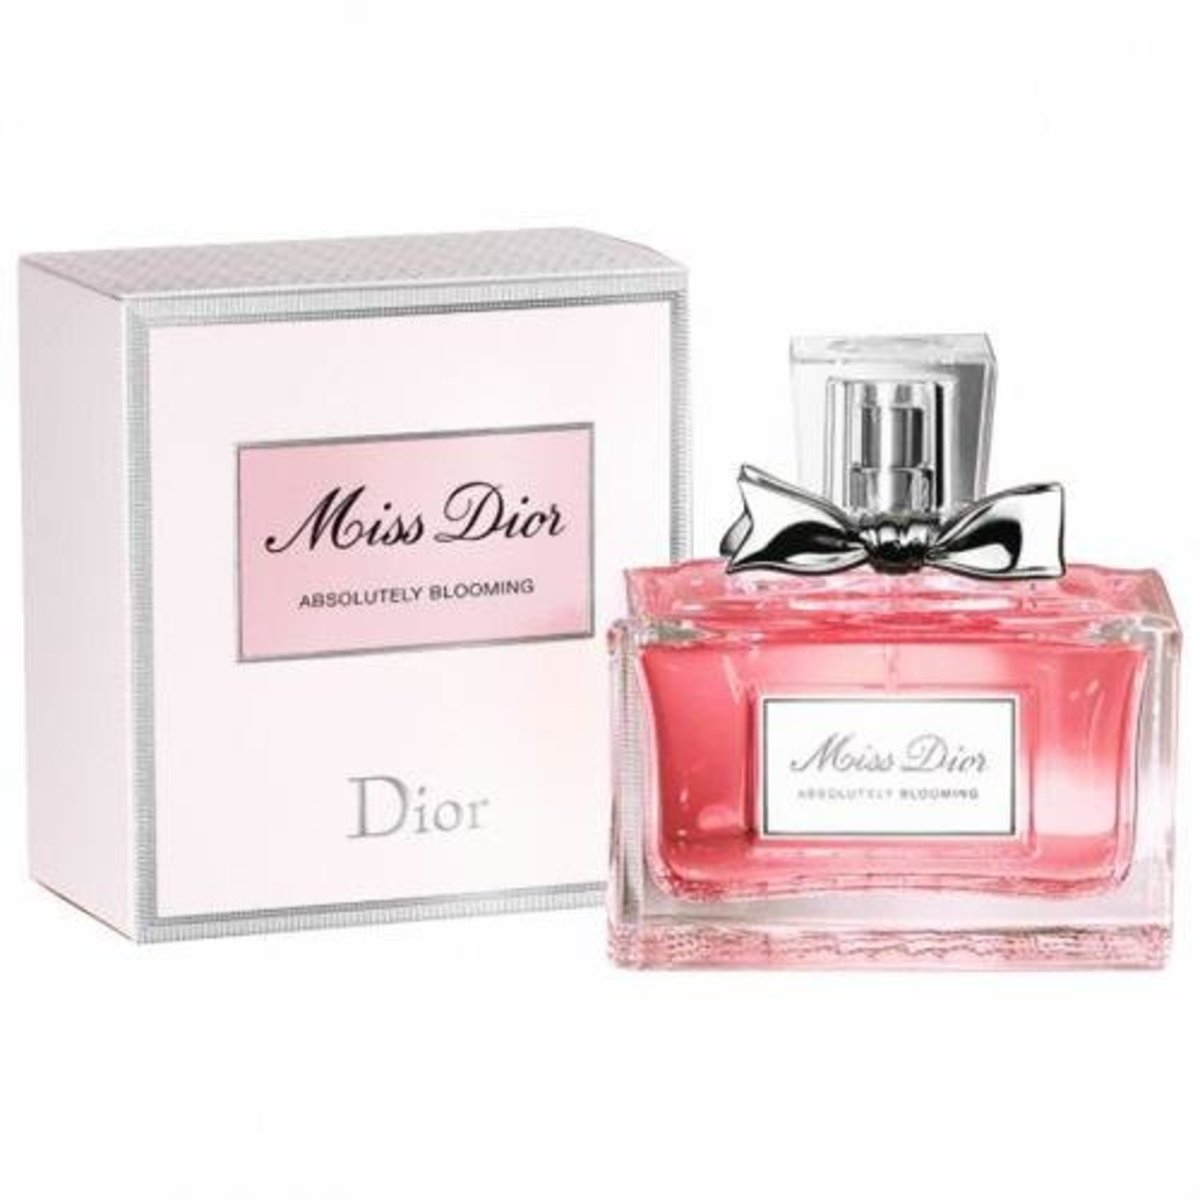 Christian Dior | Miss Dior Absolutely Blooming 香水100 ml (3348901300049